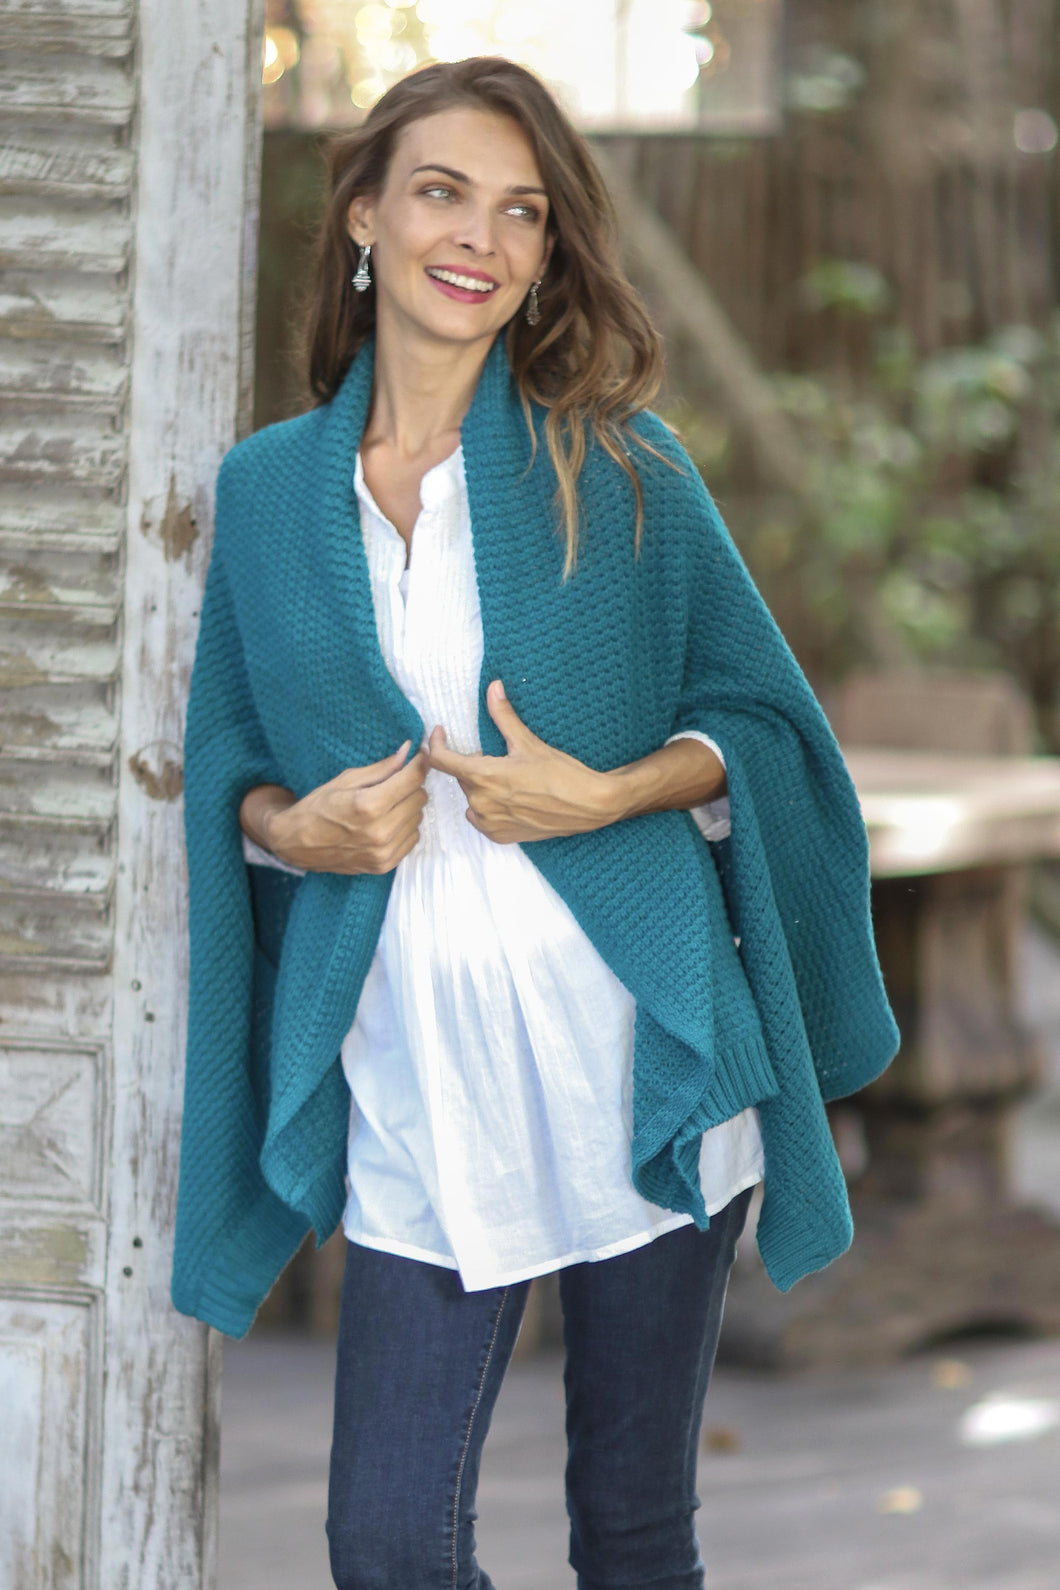 Chic Warmth in Teal